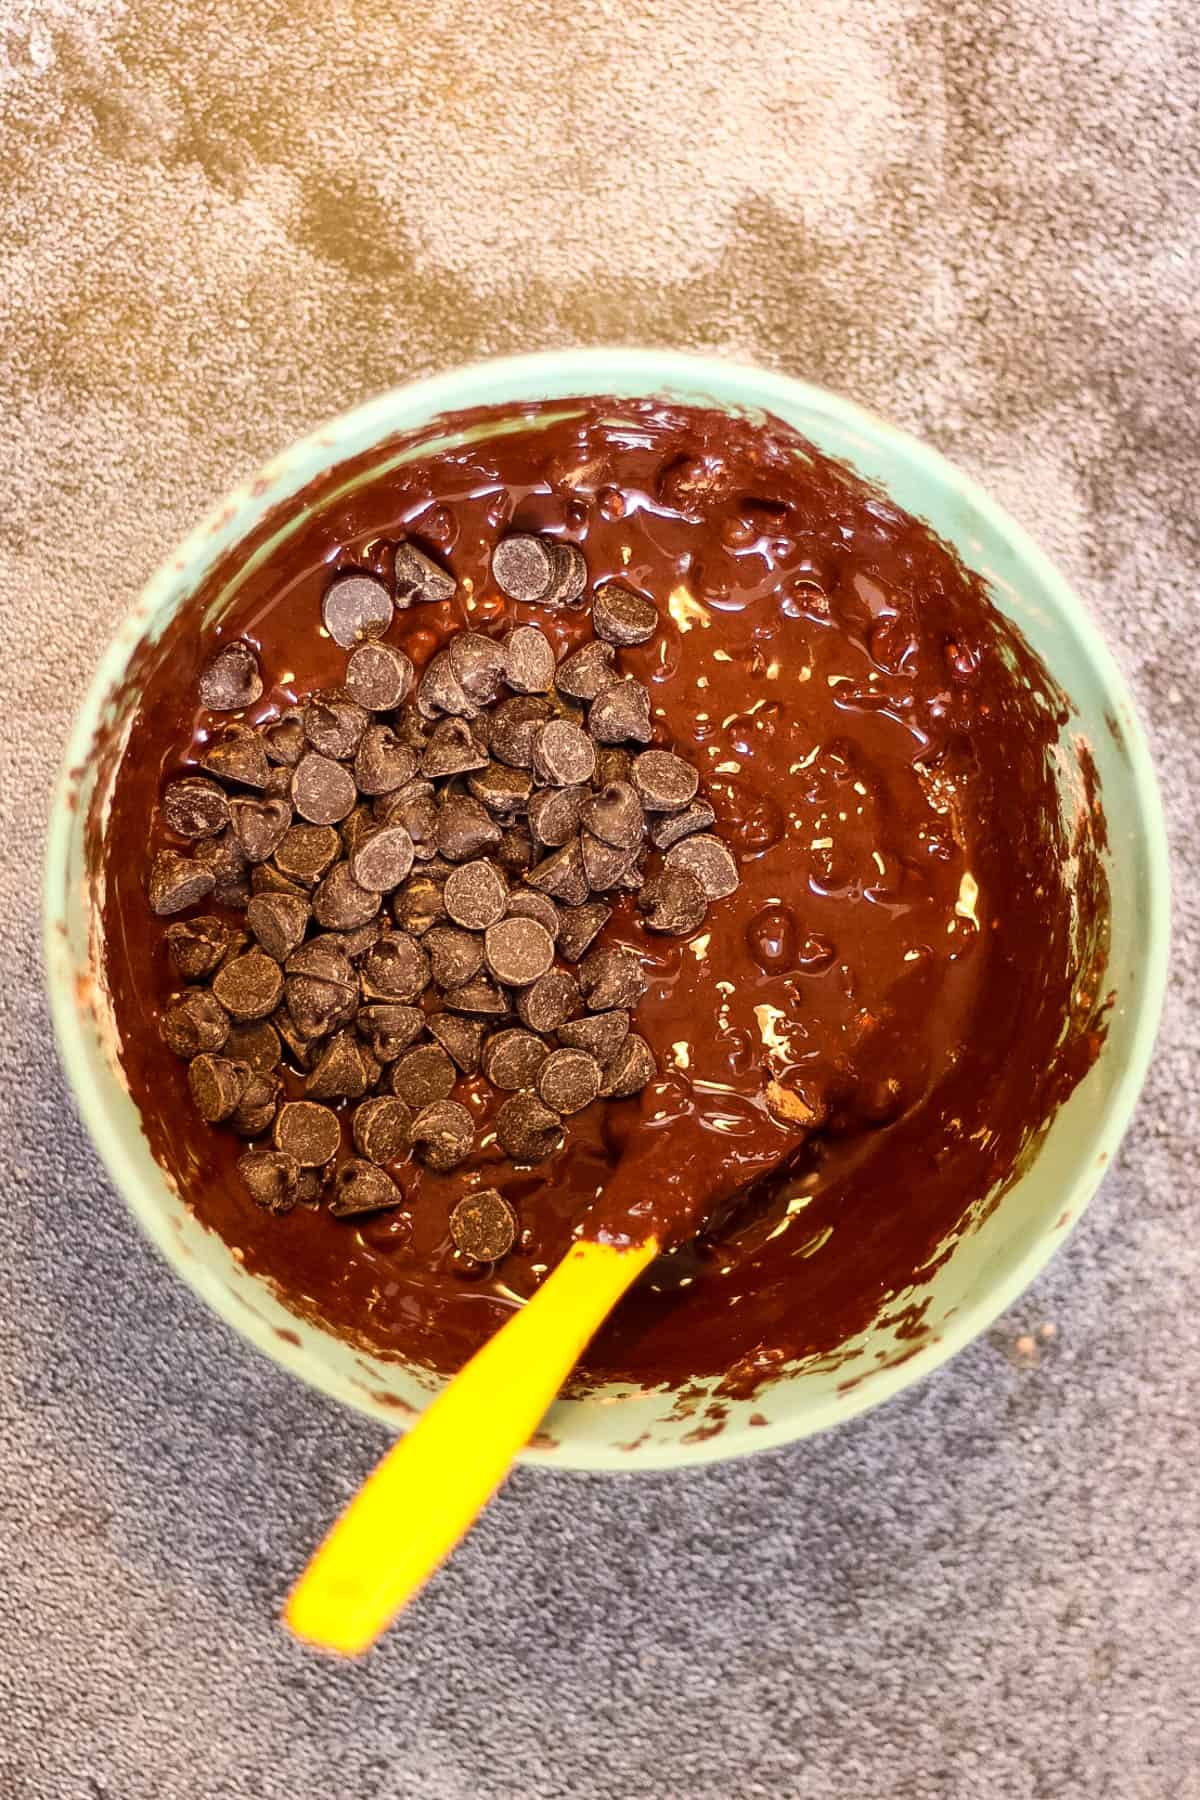 A bowl of flourless chocolate batter with a yellow spoon.